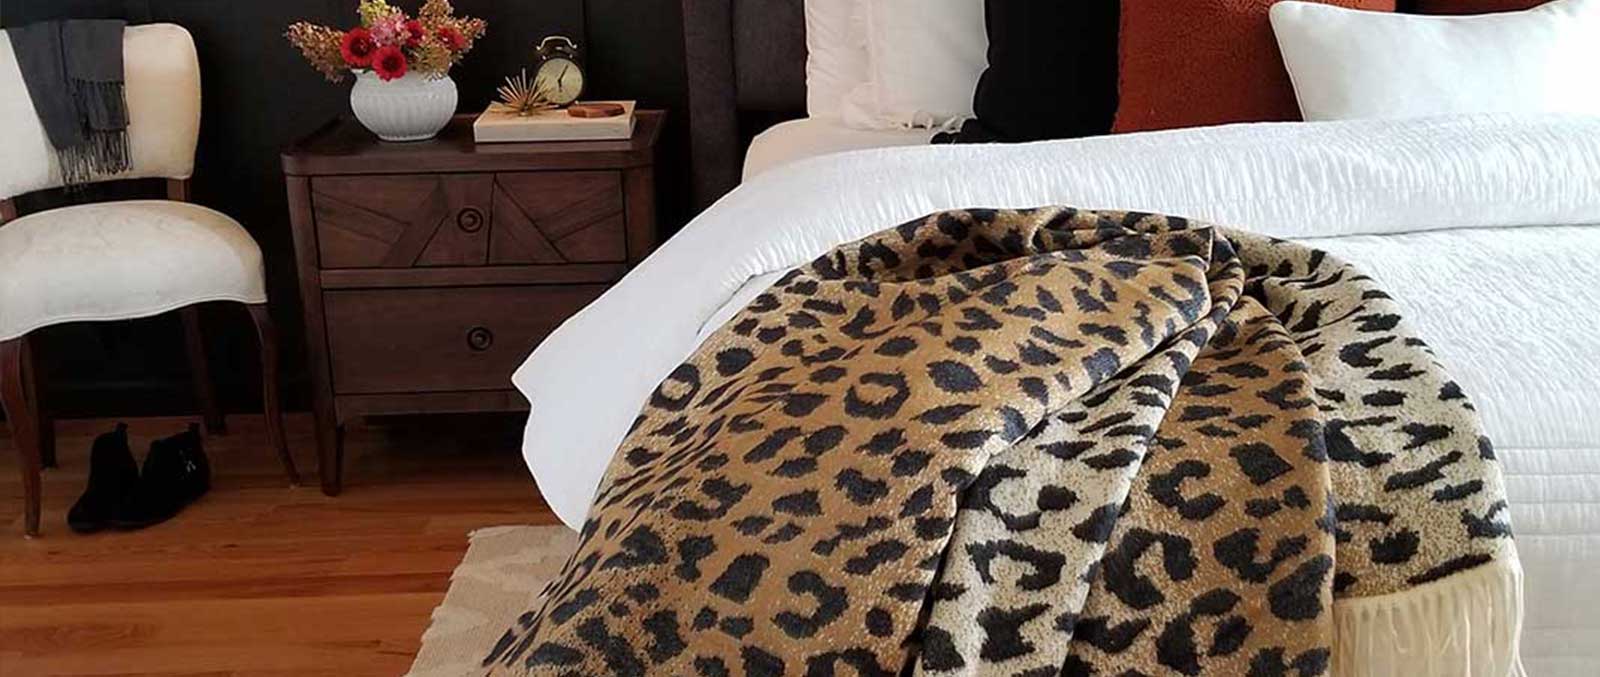 Gorgeous ways to Really Impress You House Guests leopard print African savannah throw on beautiful bed